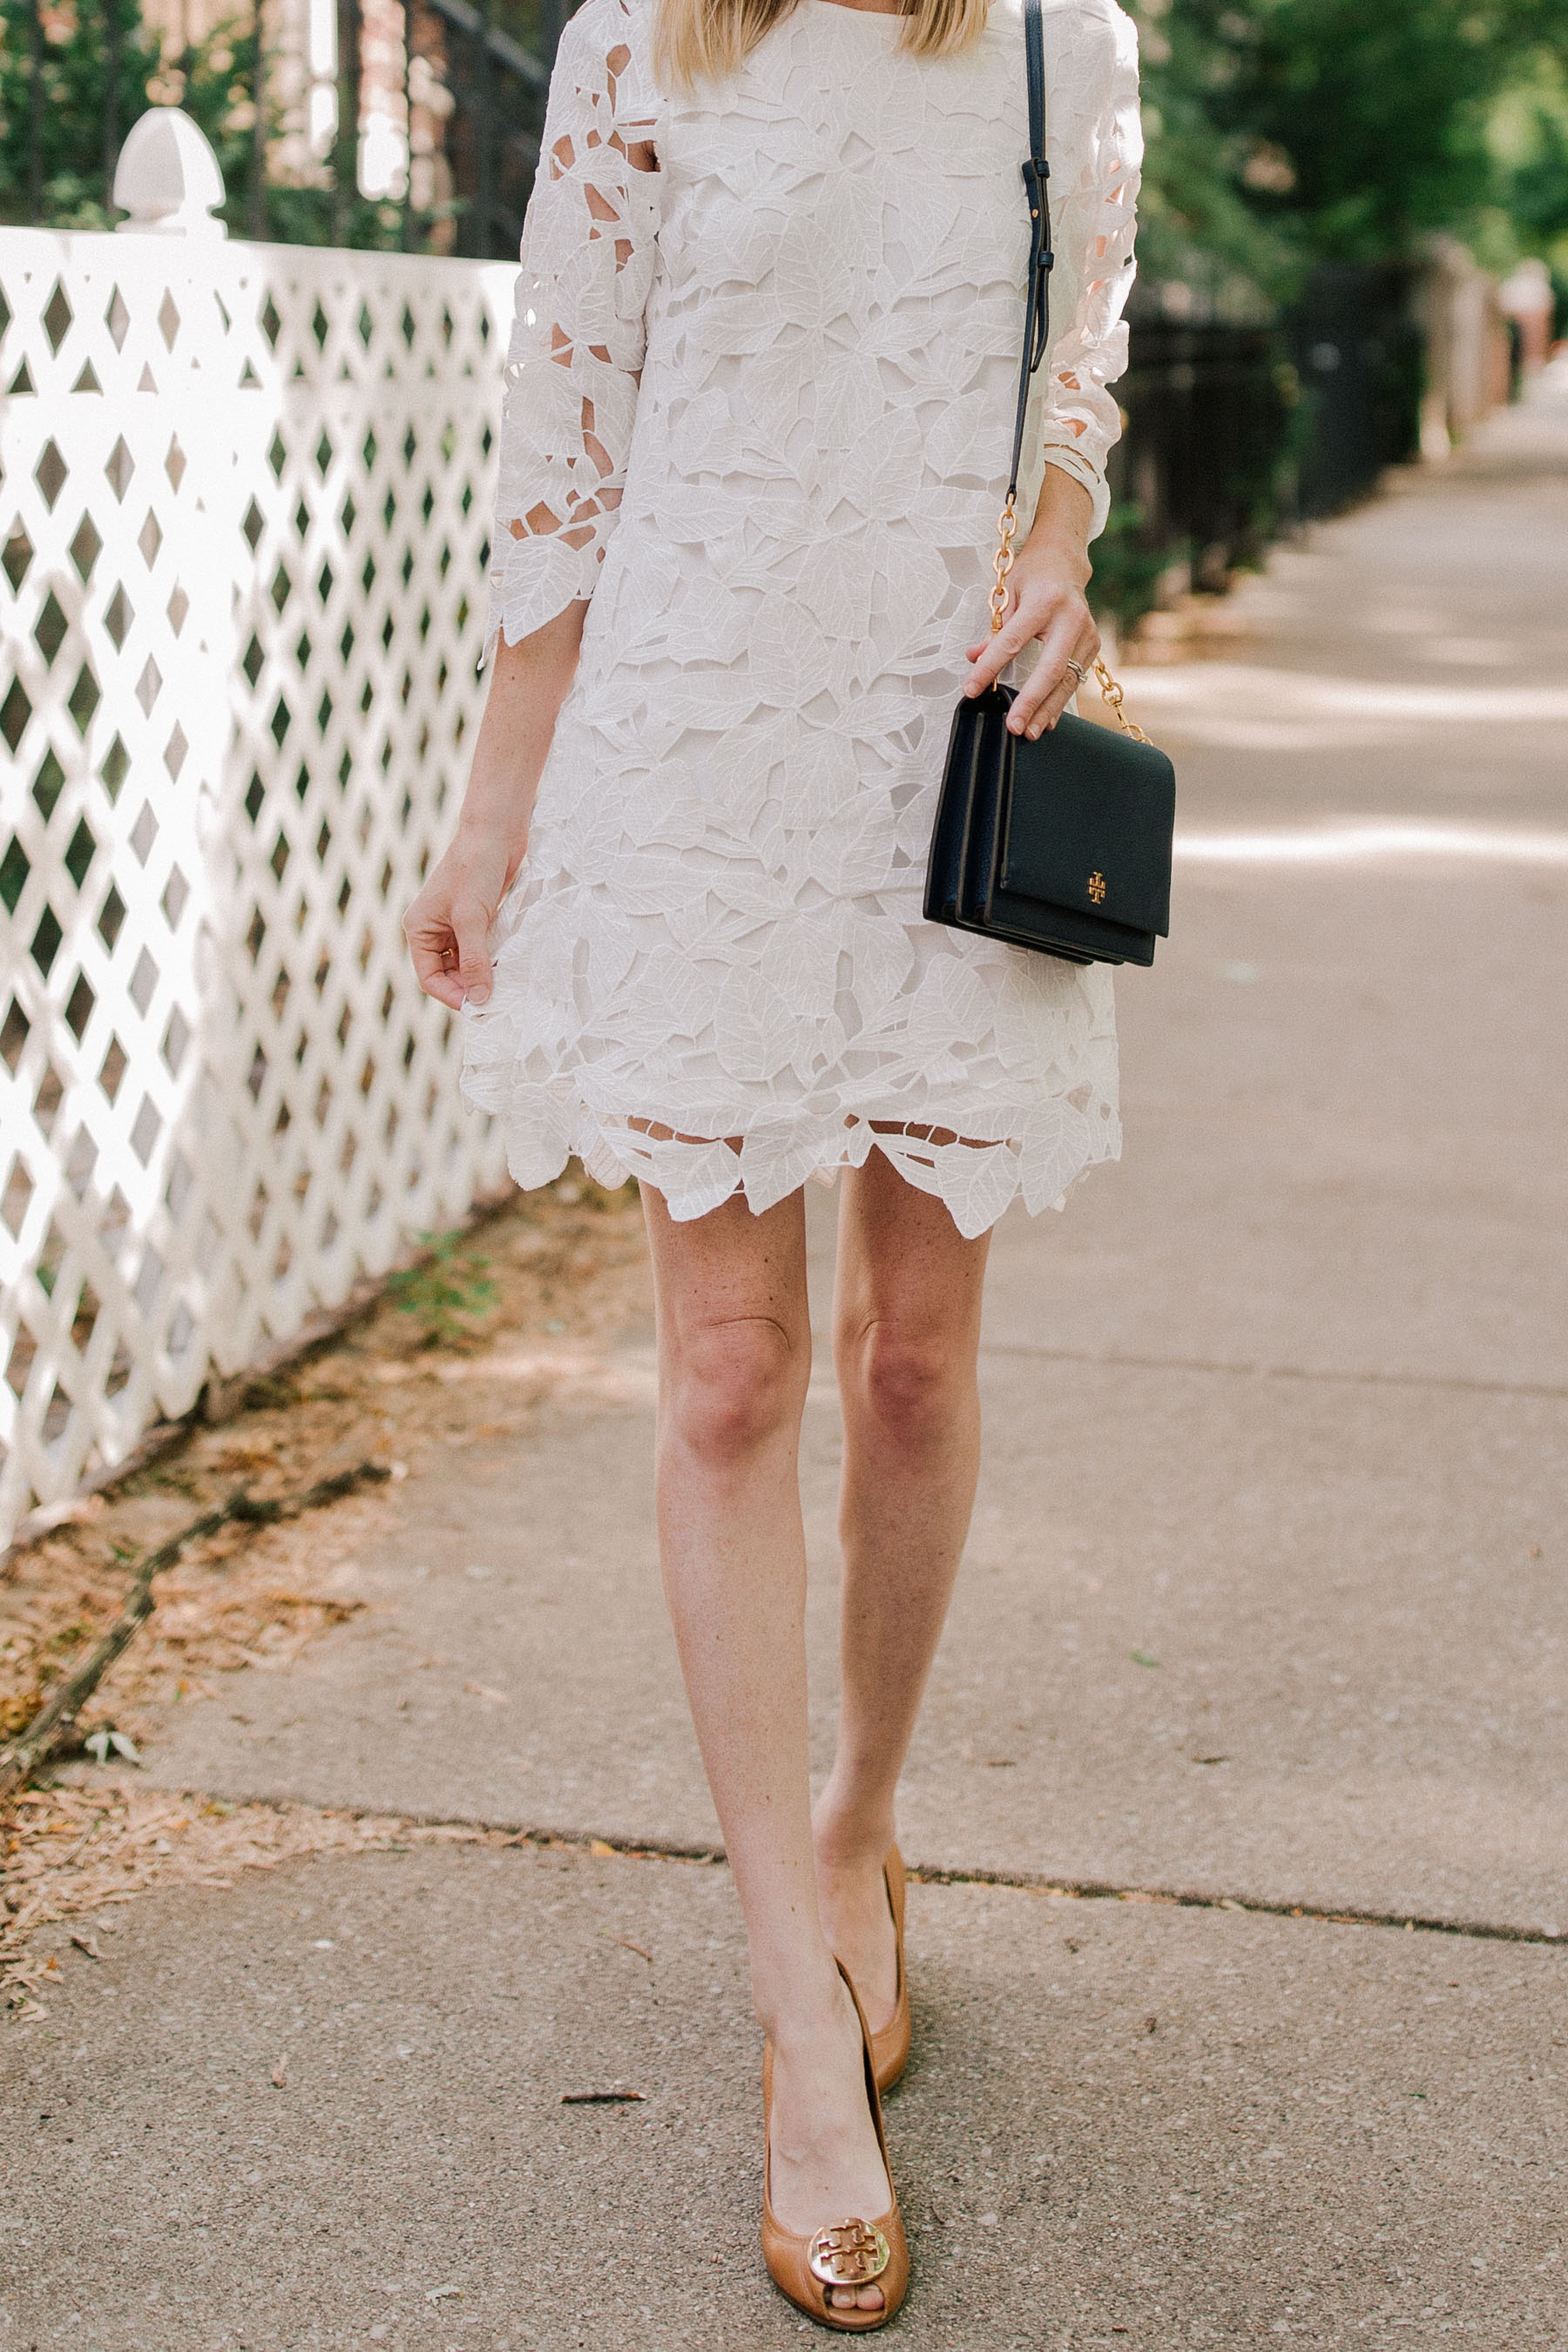 White Lace Dress / Tory Burch Navy Bag - Nordstrom - Kelly in the City